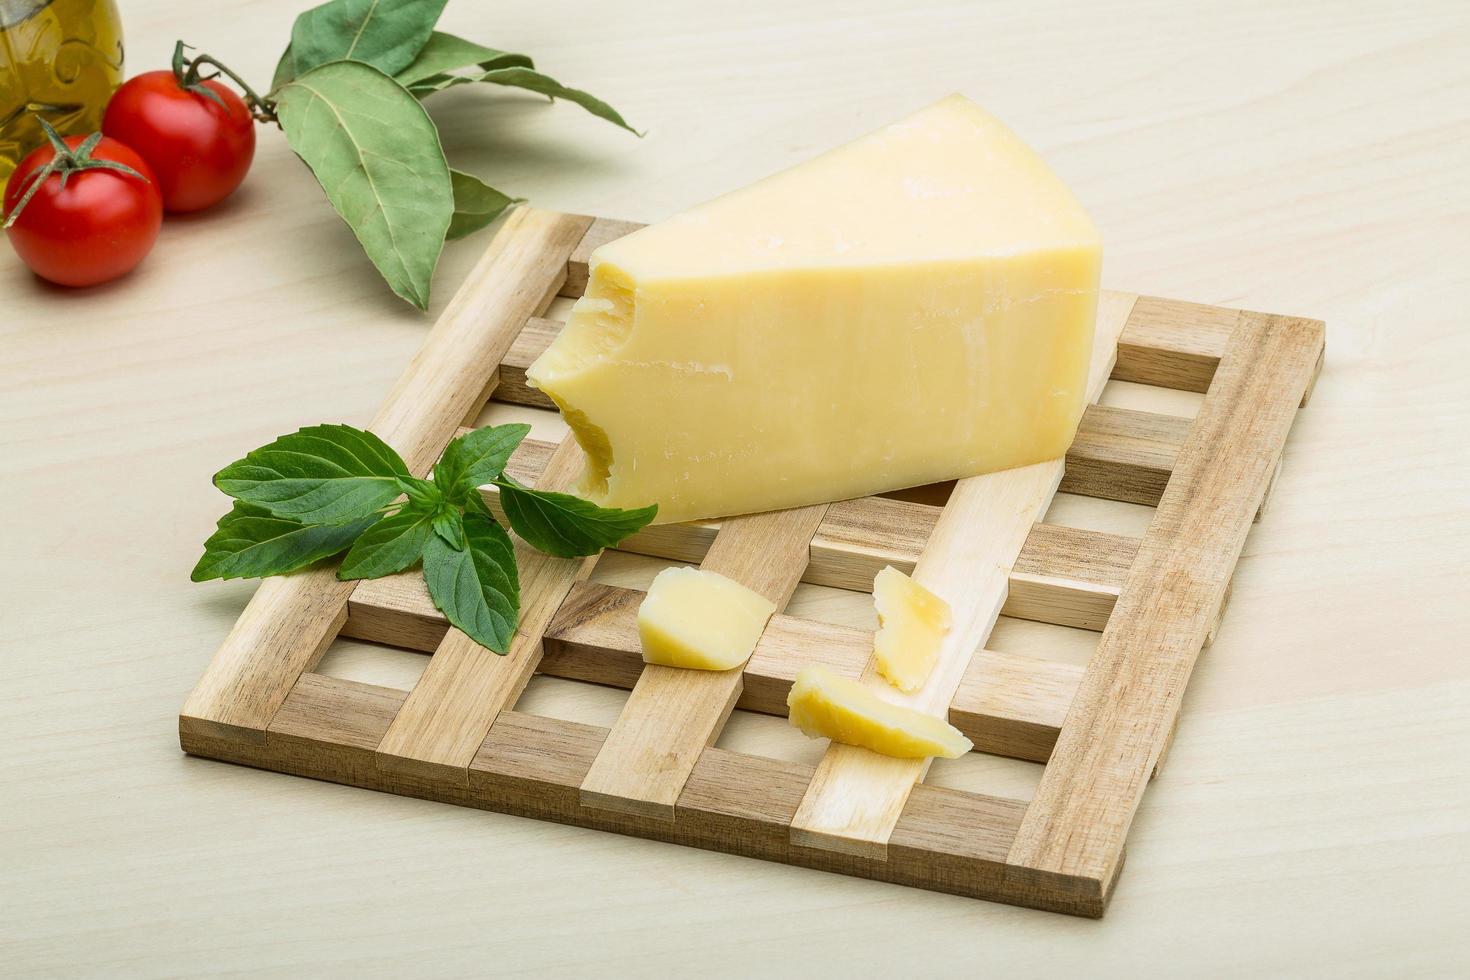 Parmesan cheese on wooden board and wooden background photo